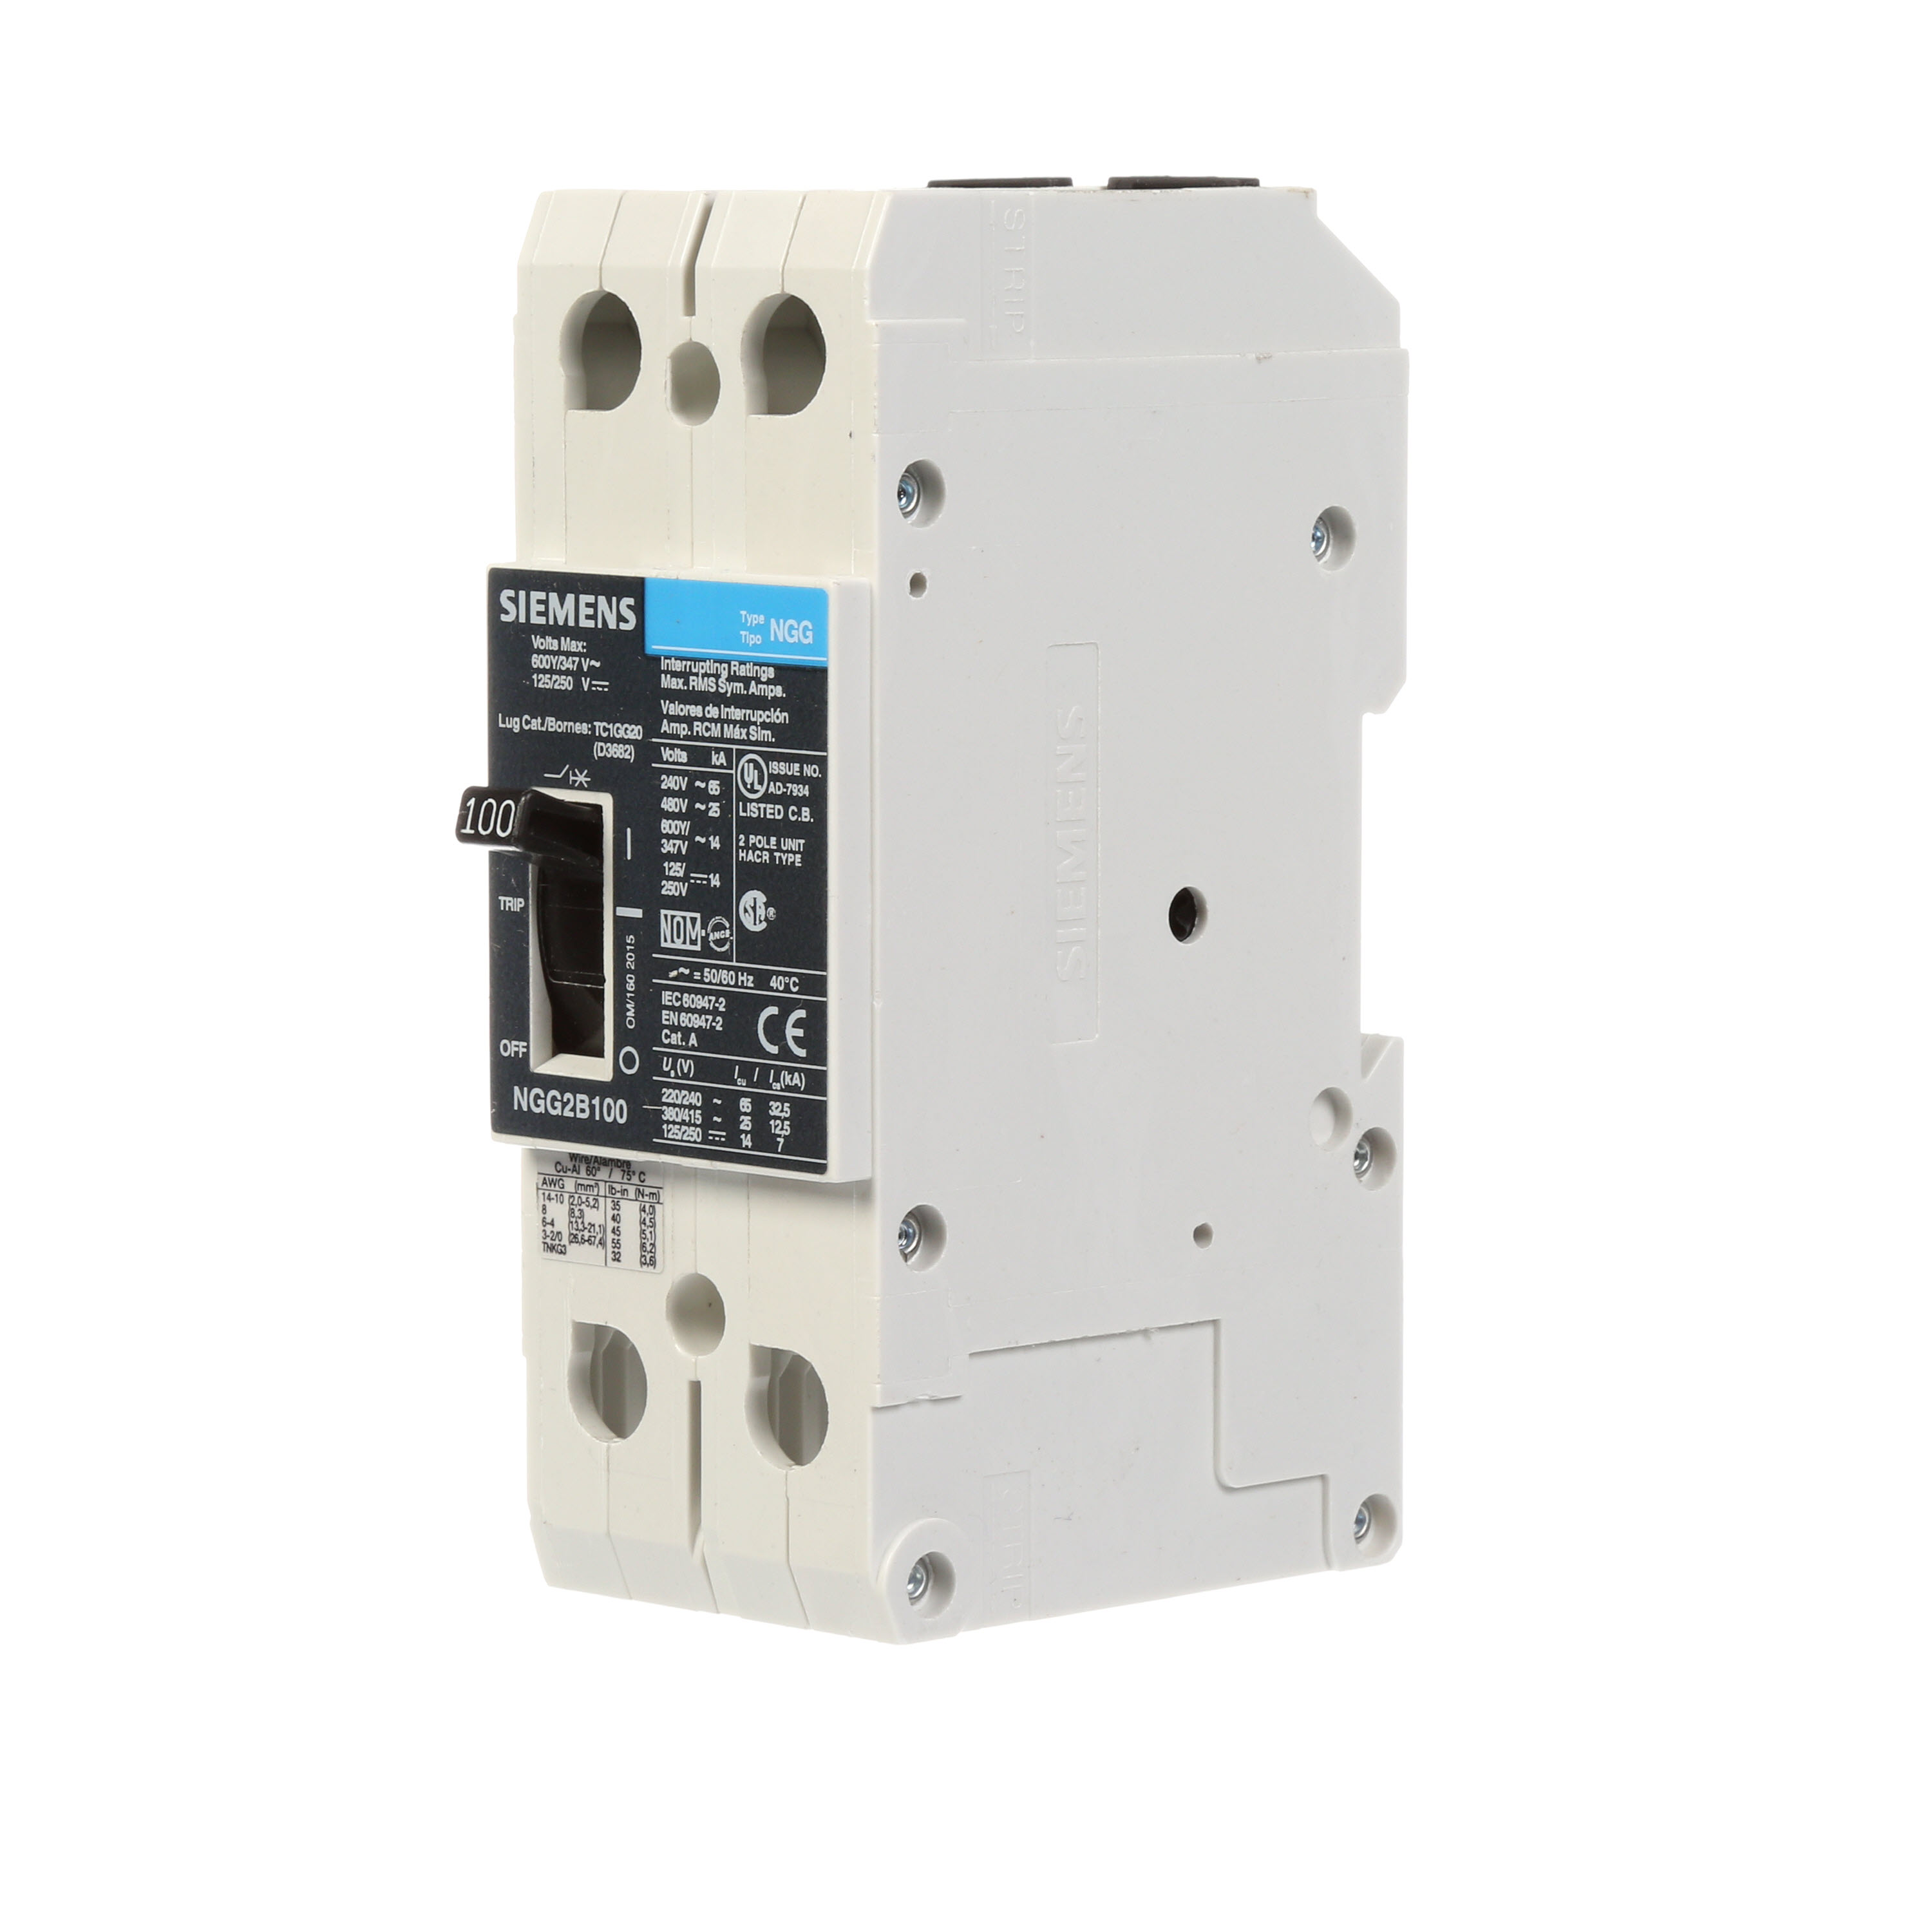 SIEMENS LOW VOLTAGE G FRAME CIRCUIT BREAKER WITH THERMAL - MAGNETIC TRIP. UL LISTED NGG FRAME WITH STANDARD BREAKING CAPACITY. 100A 2-POLE (14KAIC AT 600Y/347V) (25KAIC AT 480V). SPECIAL FEATURES MOUNTS ON DIN RAIL / SCREW, LINE AND LOAD SIDE LUGS (TC1GG20) WIRE RANGE 8 - 1/0 AWS (CU/AL). DIMENSIONS (W x H x D) IN 2 x5.4 x 2.8.